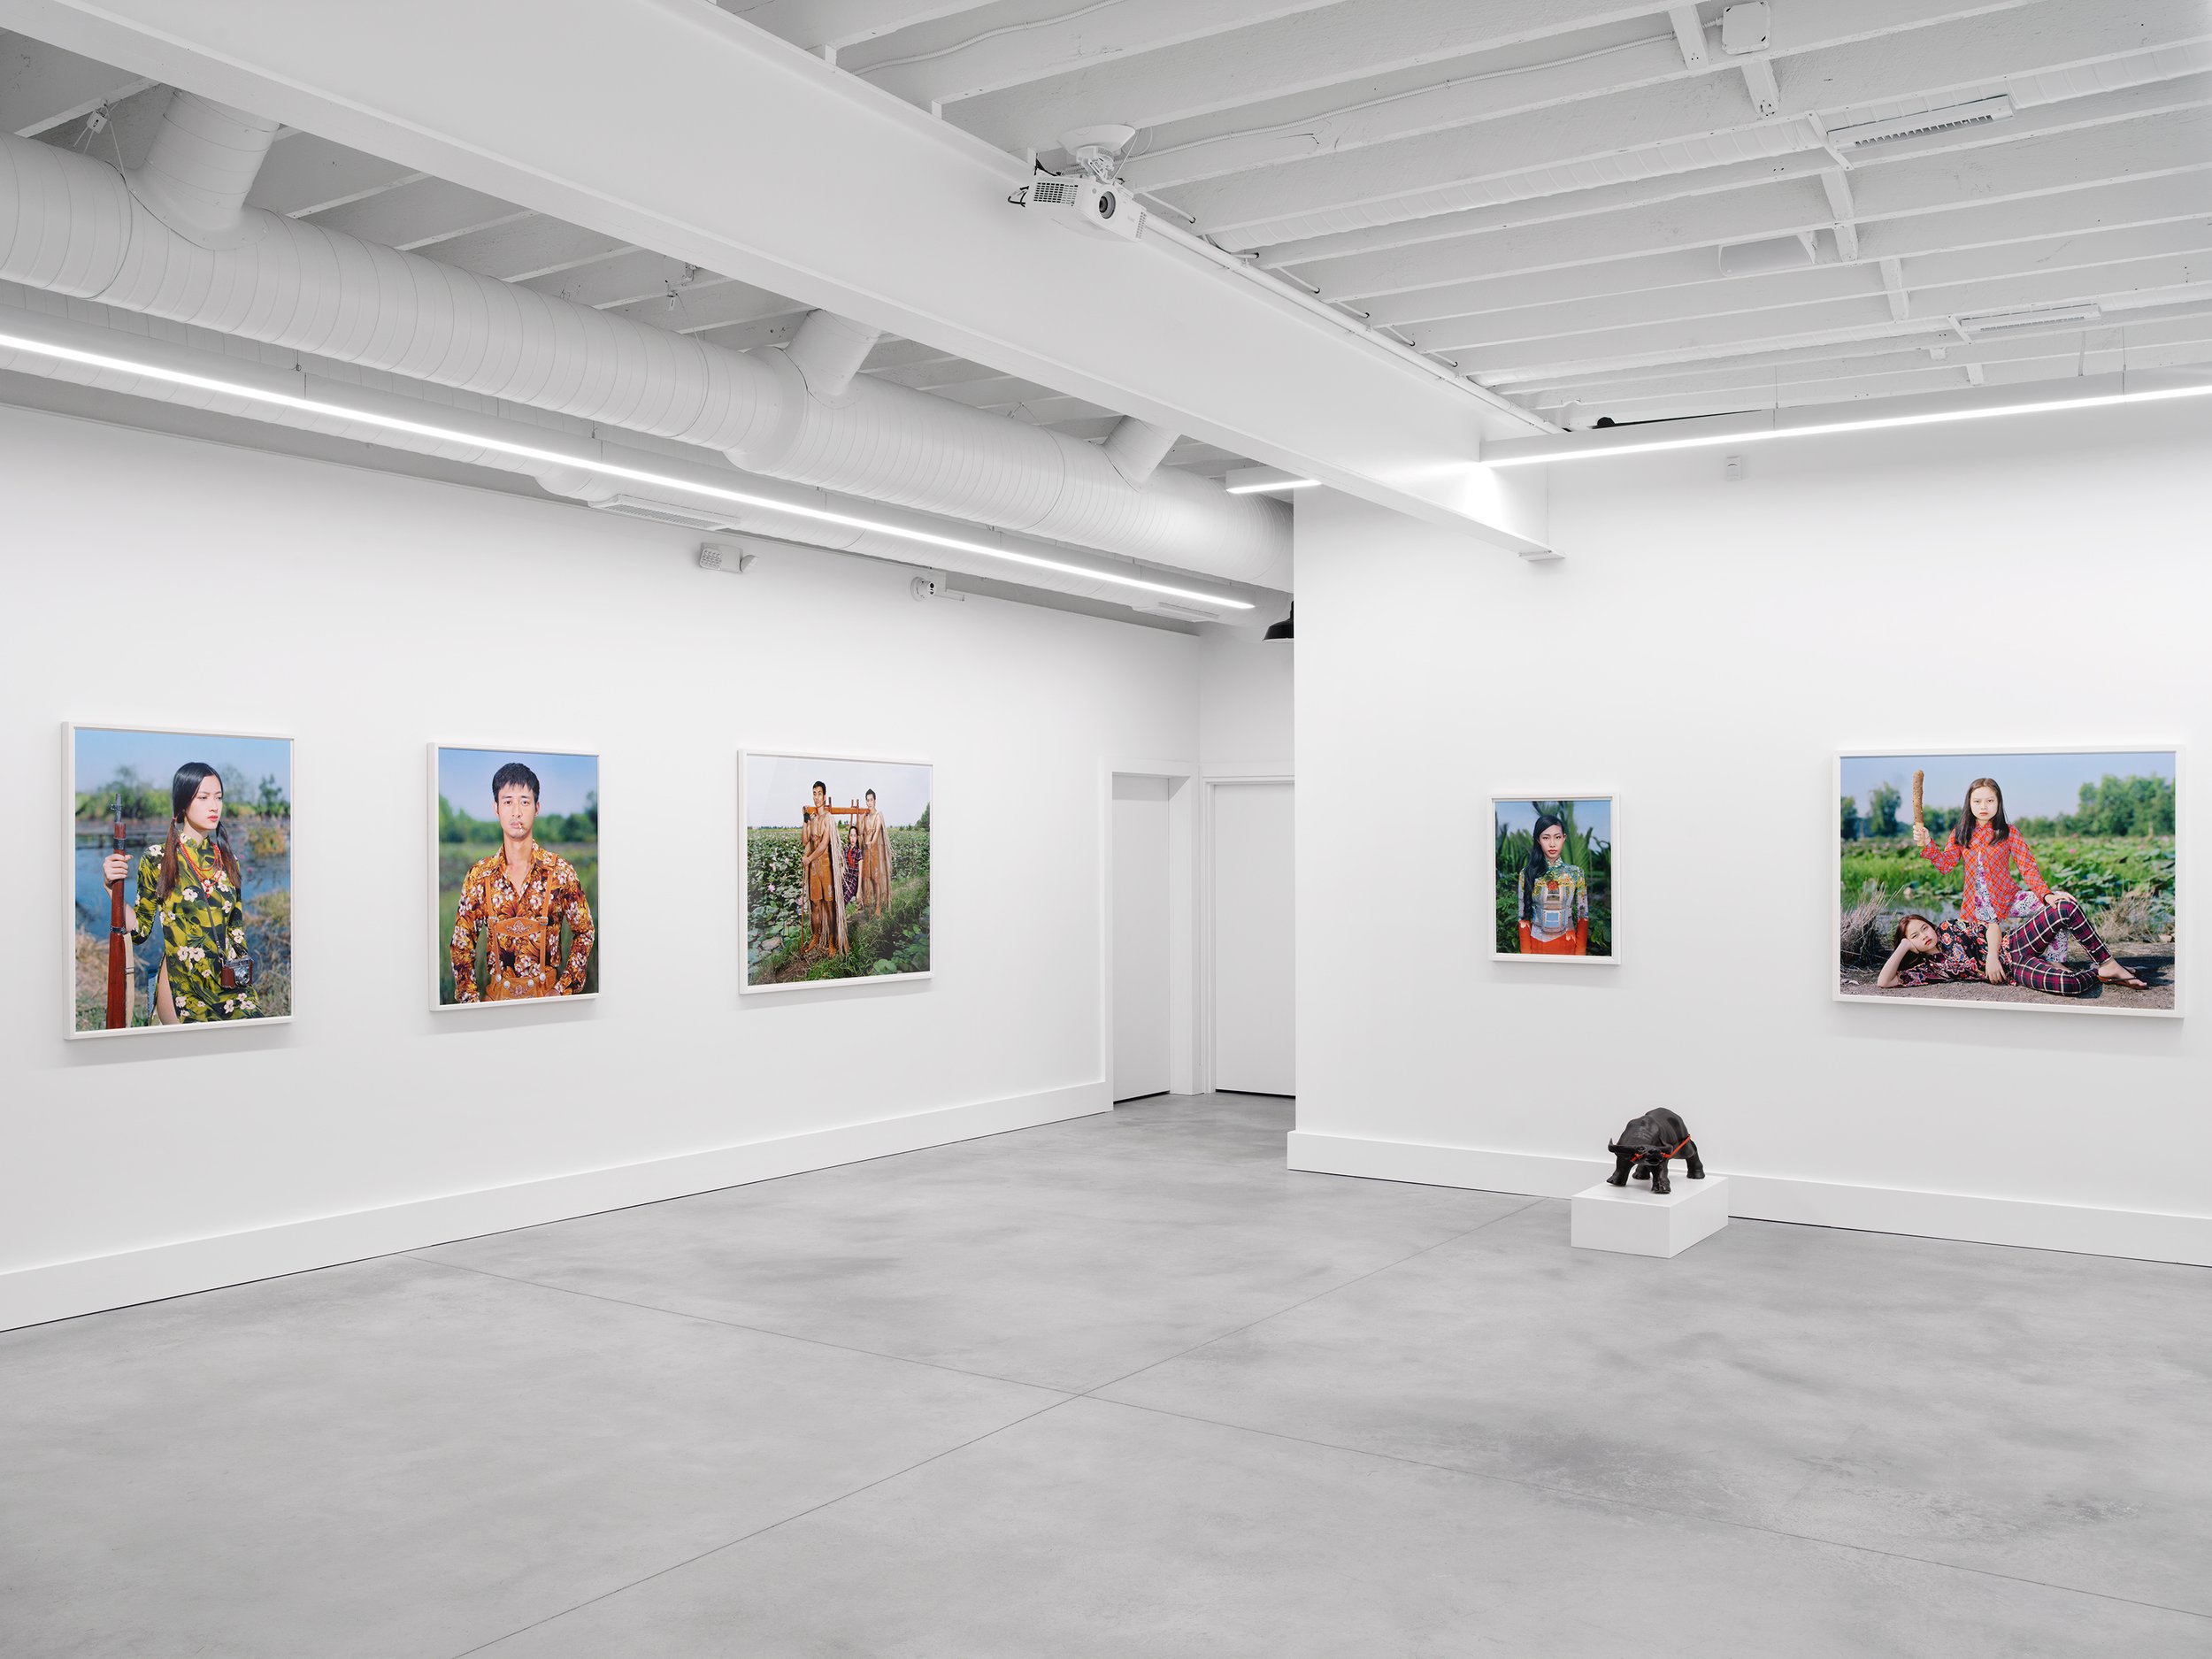  Installation view of Olivier Laude:   Chiến Thắng Ba Tơ left to right:  Sis{Quynh}, Linh, Cáng, Tuyền Vestida, Untitled (Buffalo), &amp; The Wrongerers,  